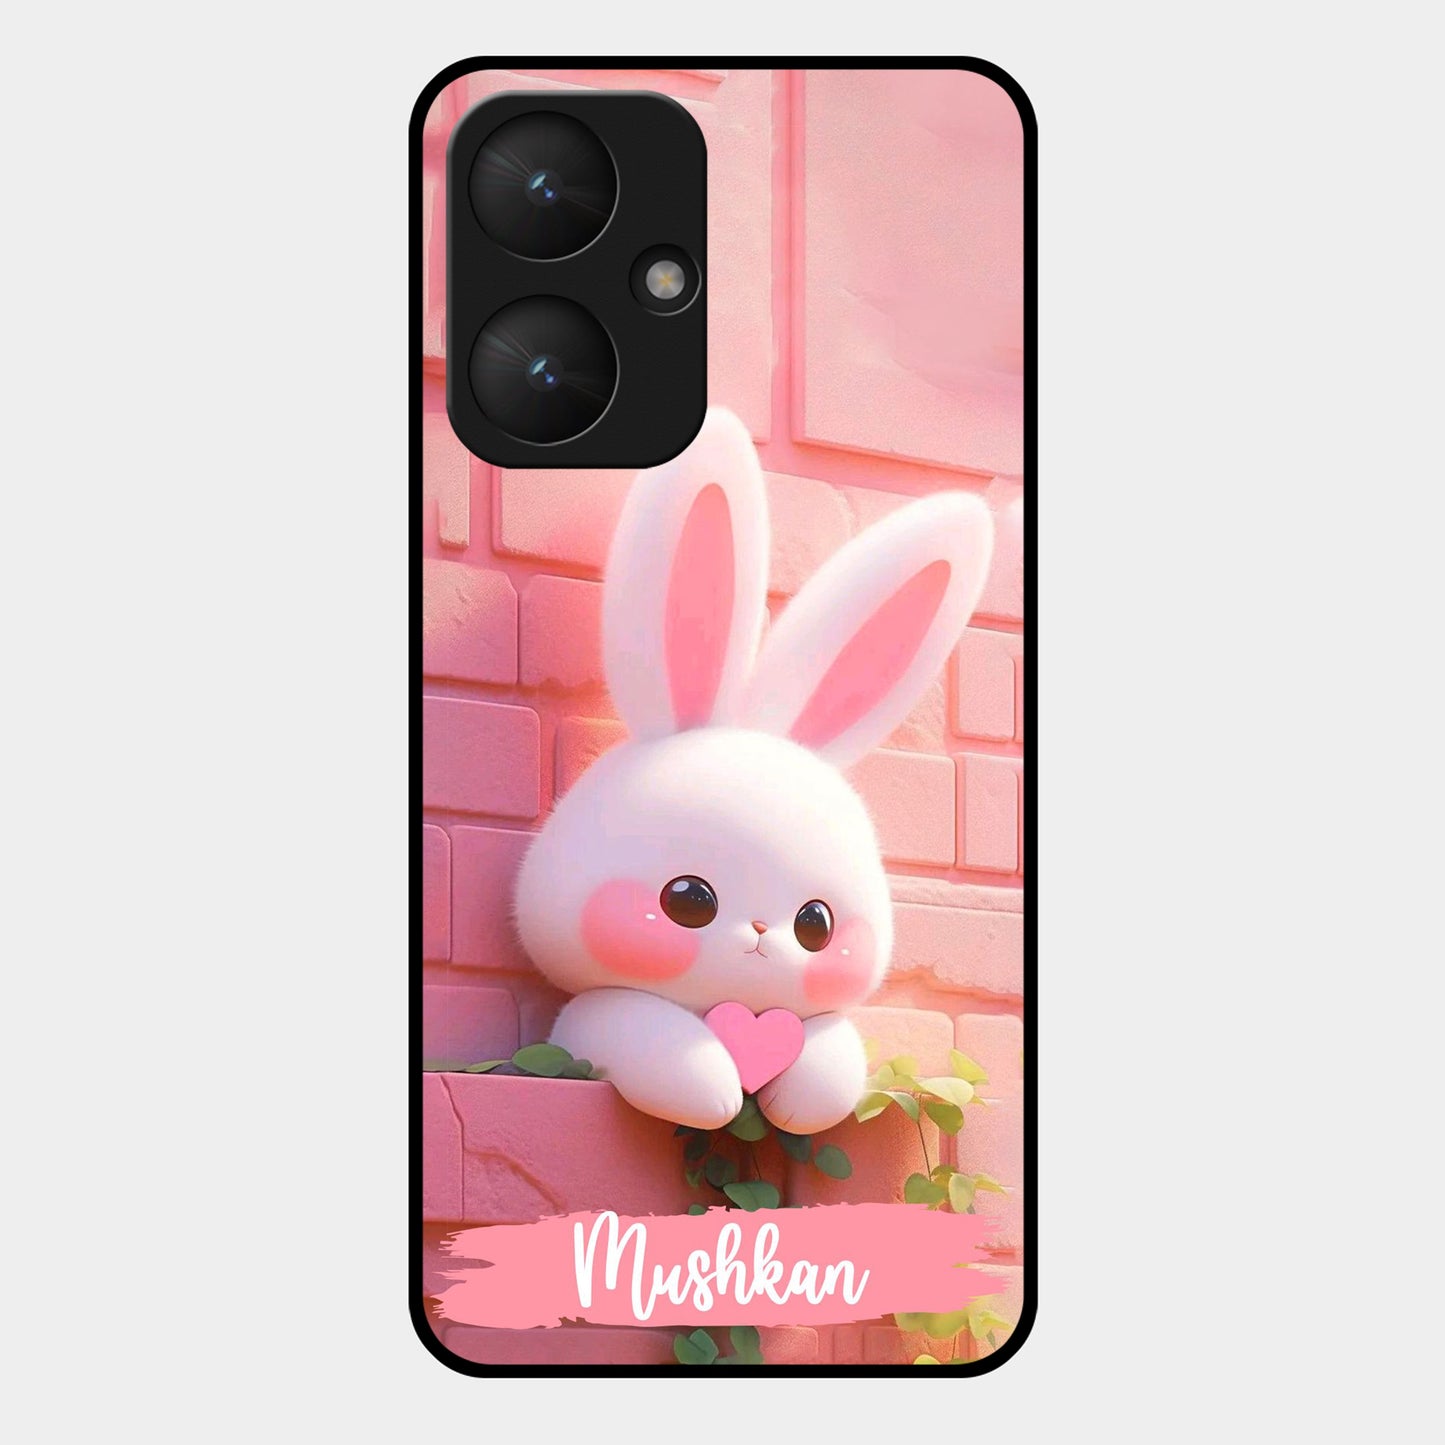 Bunny Glossy Metal Case Cover For Redmi